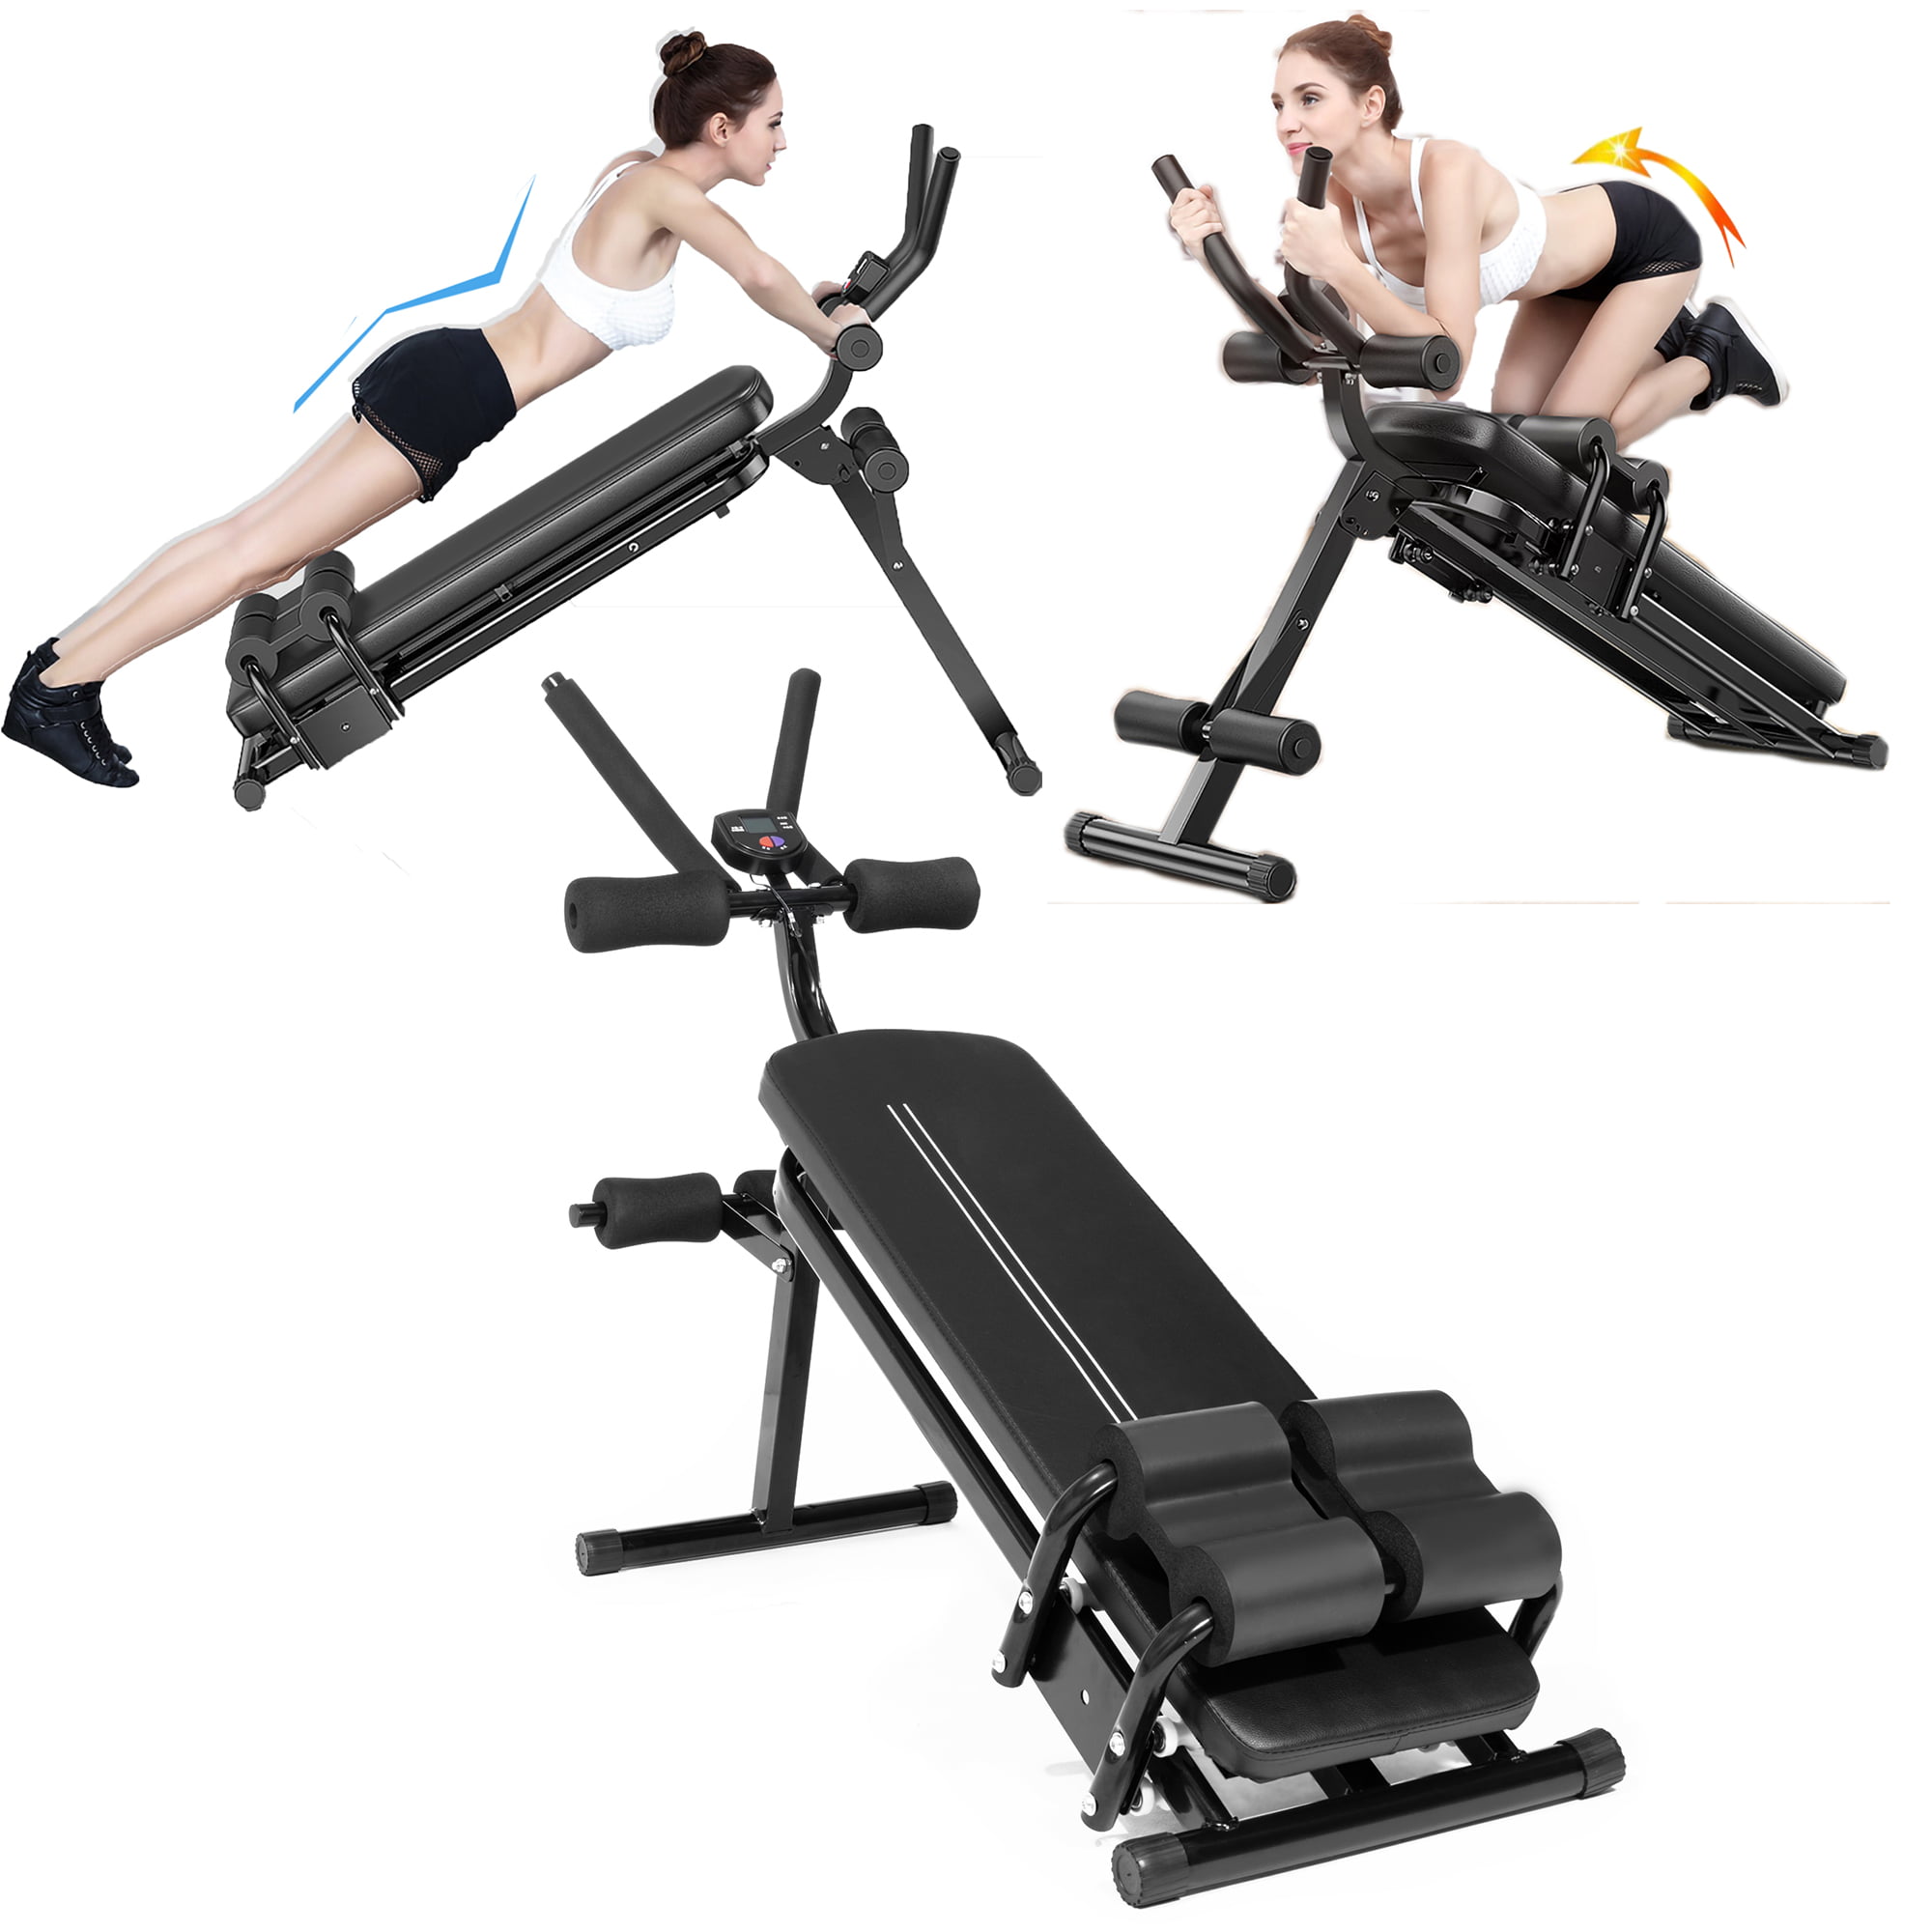 Details about   Foldable Adjustable Decline Sit Up Bench Crunch Board Fitness Home Gym Exercise 